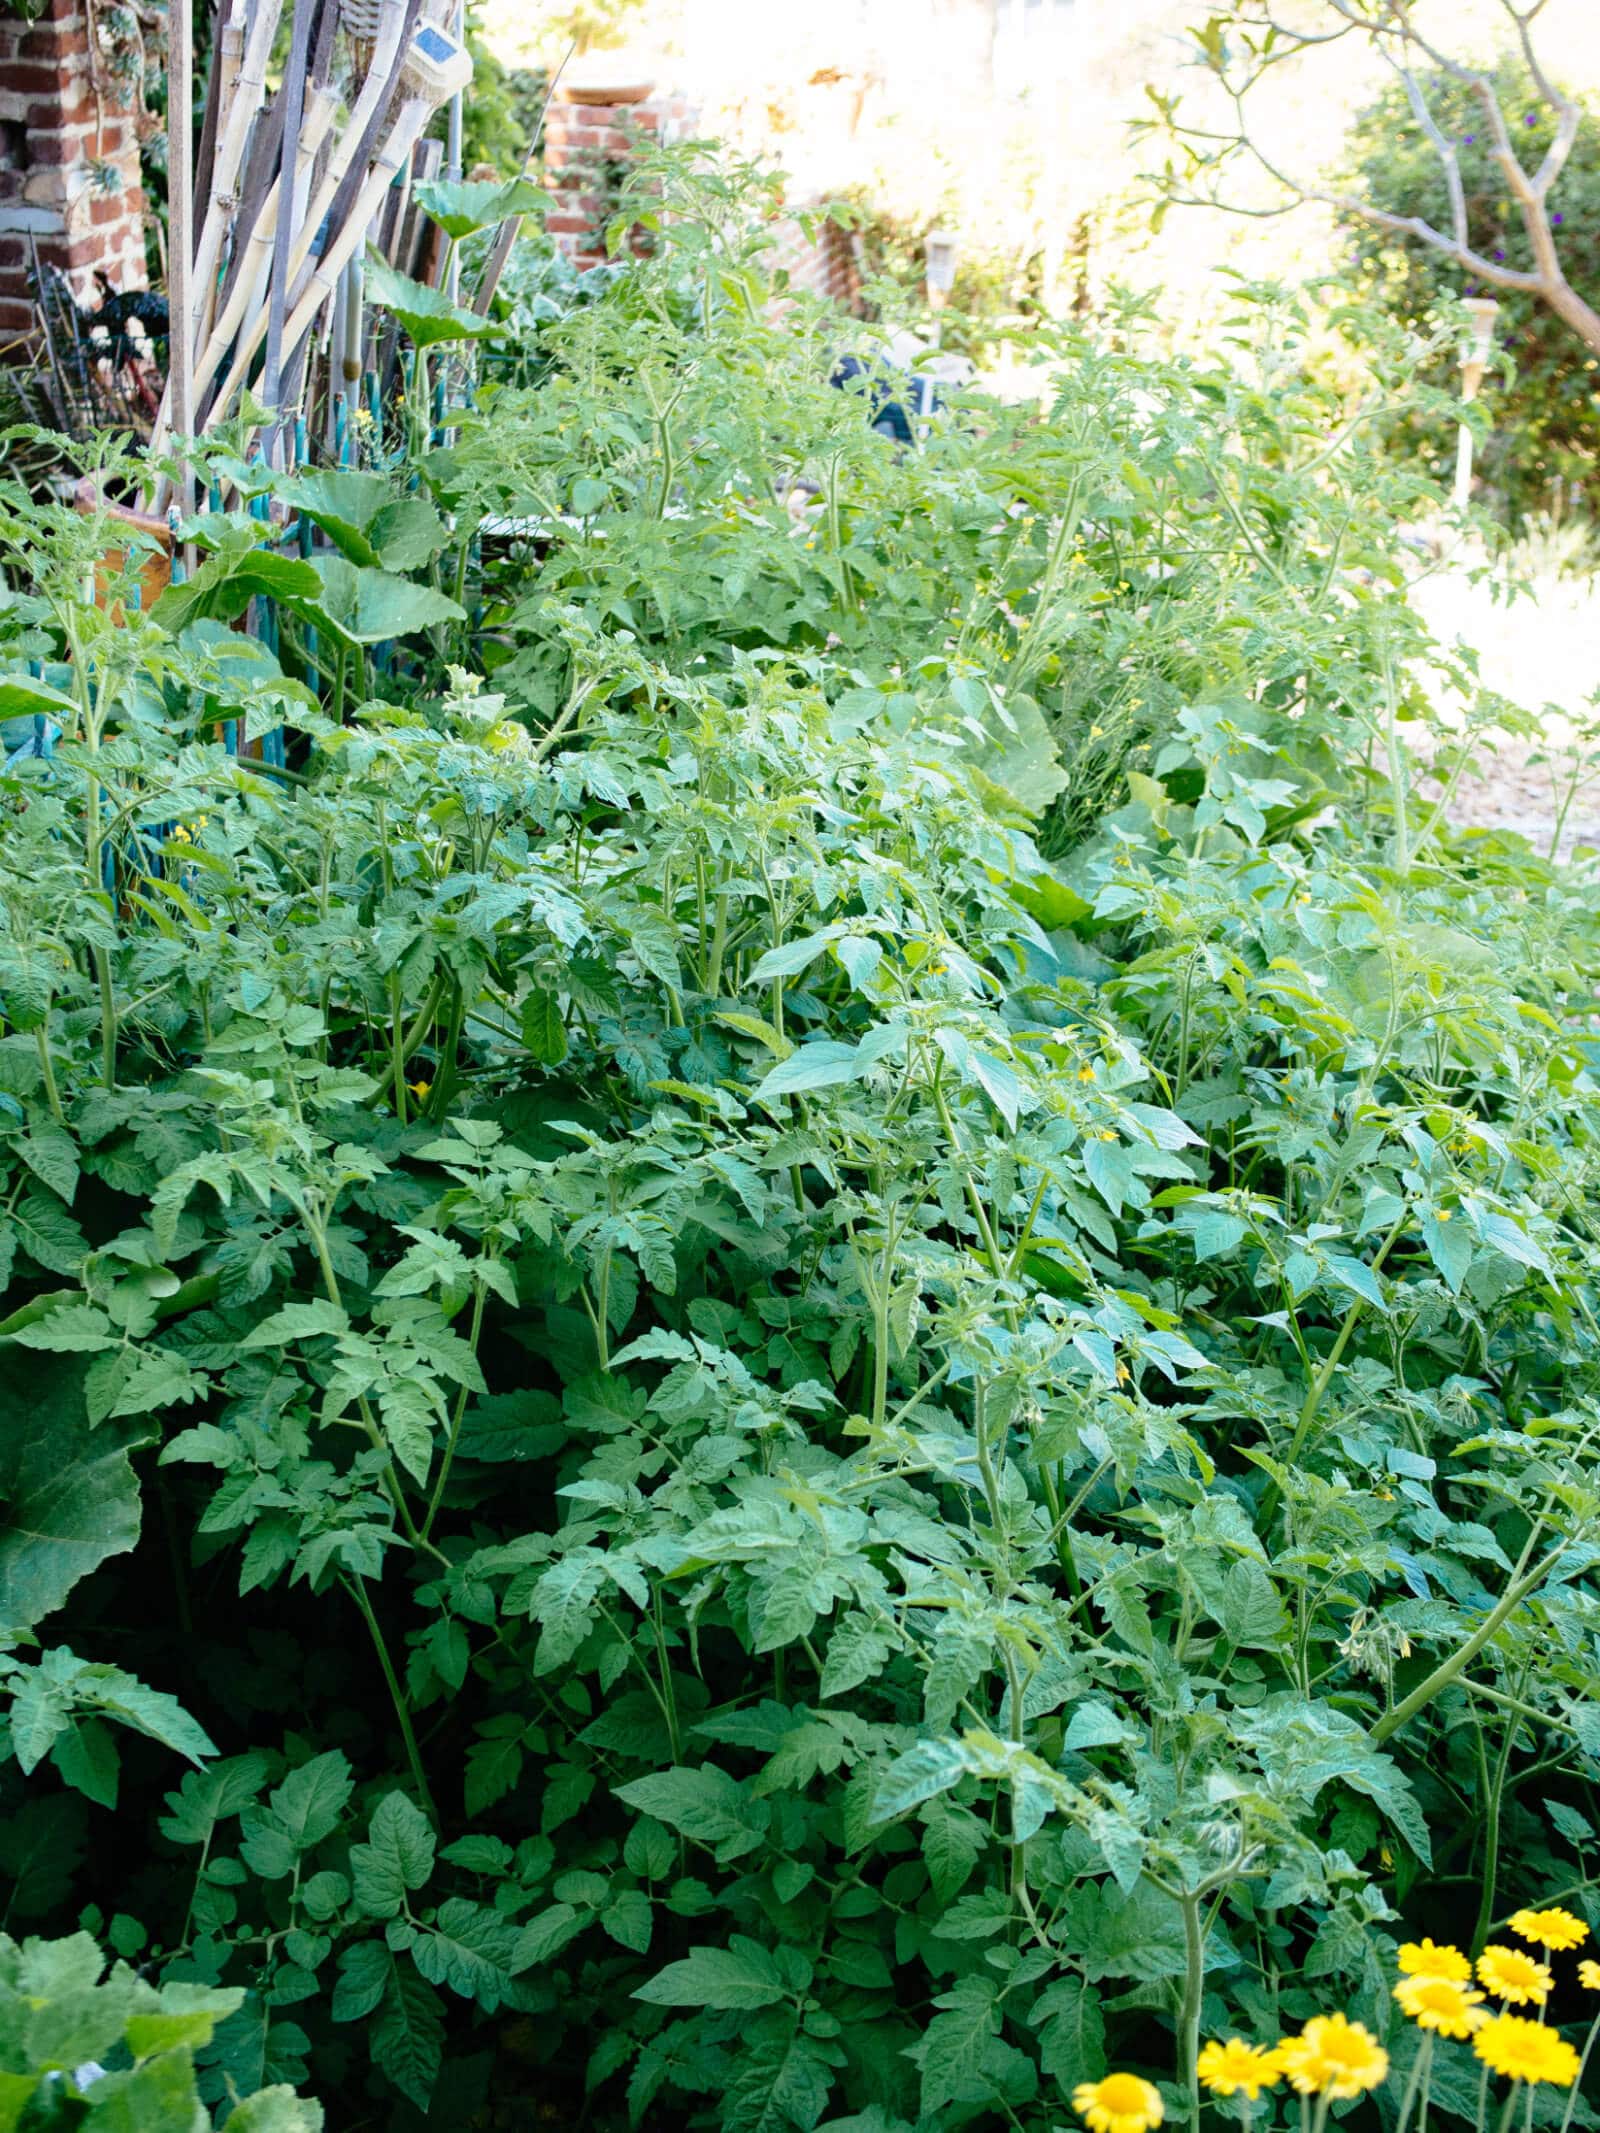 Homegrown tomato plants thriving in summer